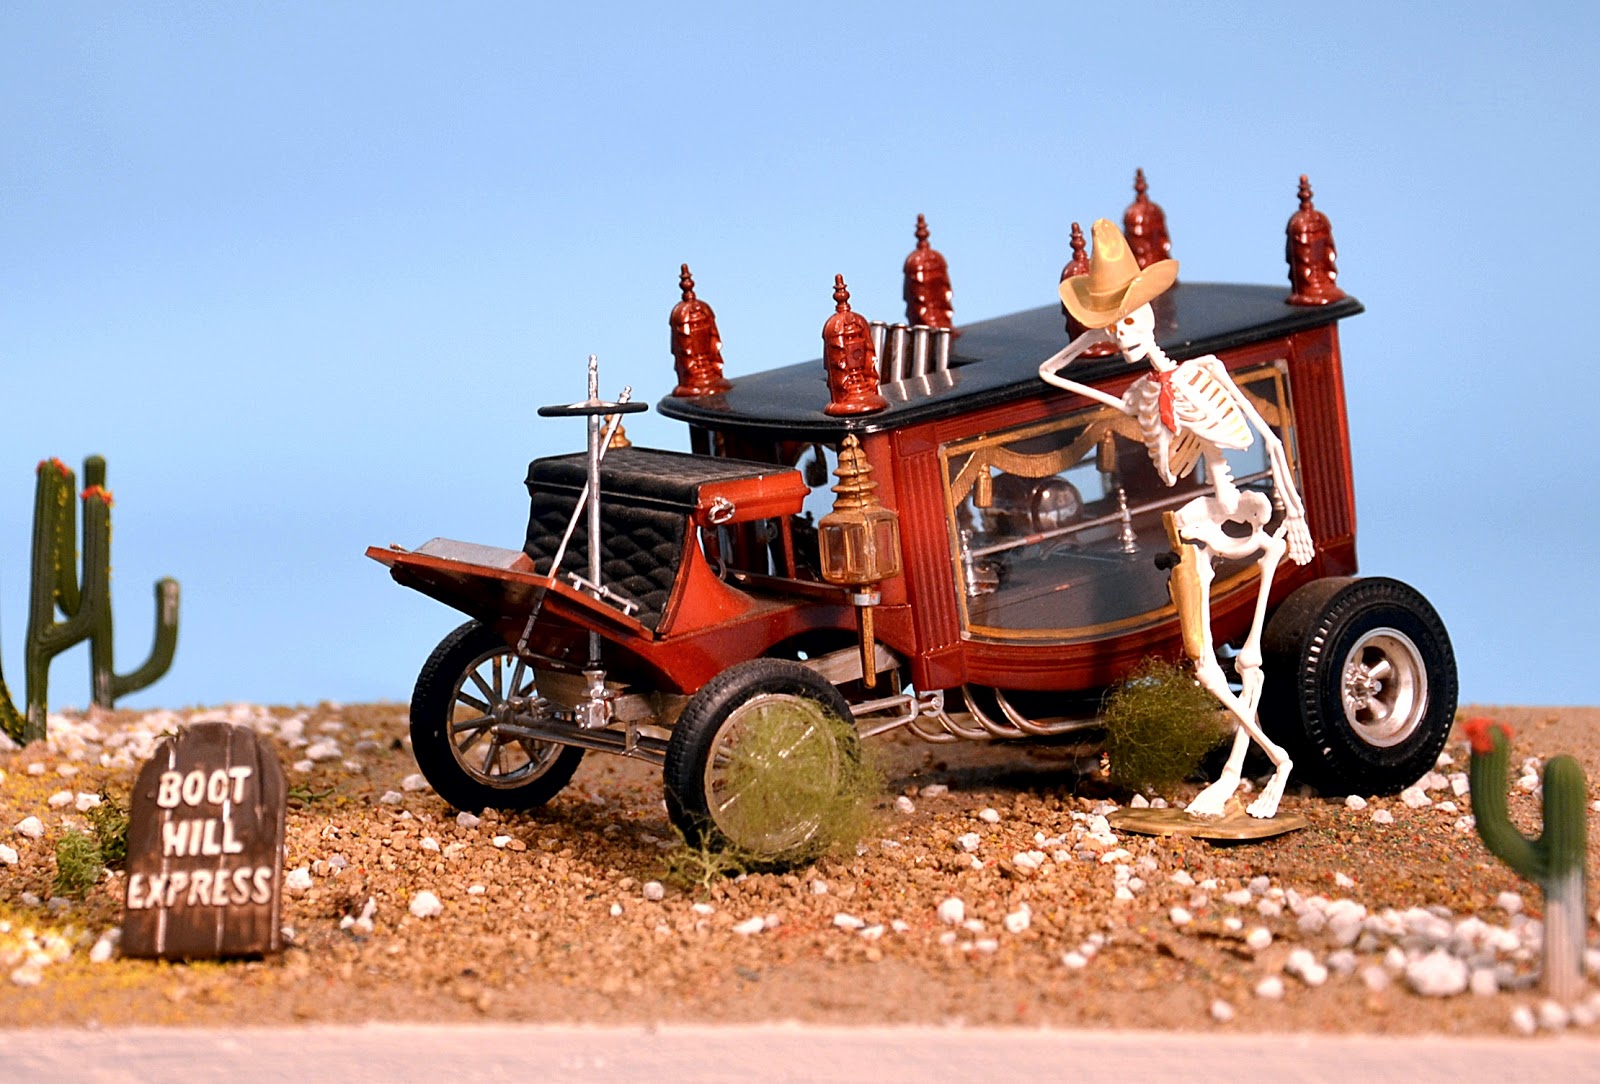 Scale Model News: 1:24 SCALE 'BOOT HILL EXPRESS' CUSTOM CAR KIT FROM 